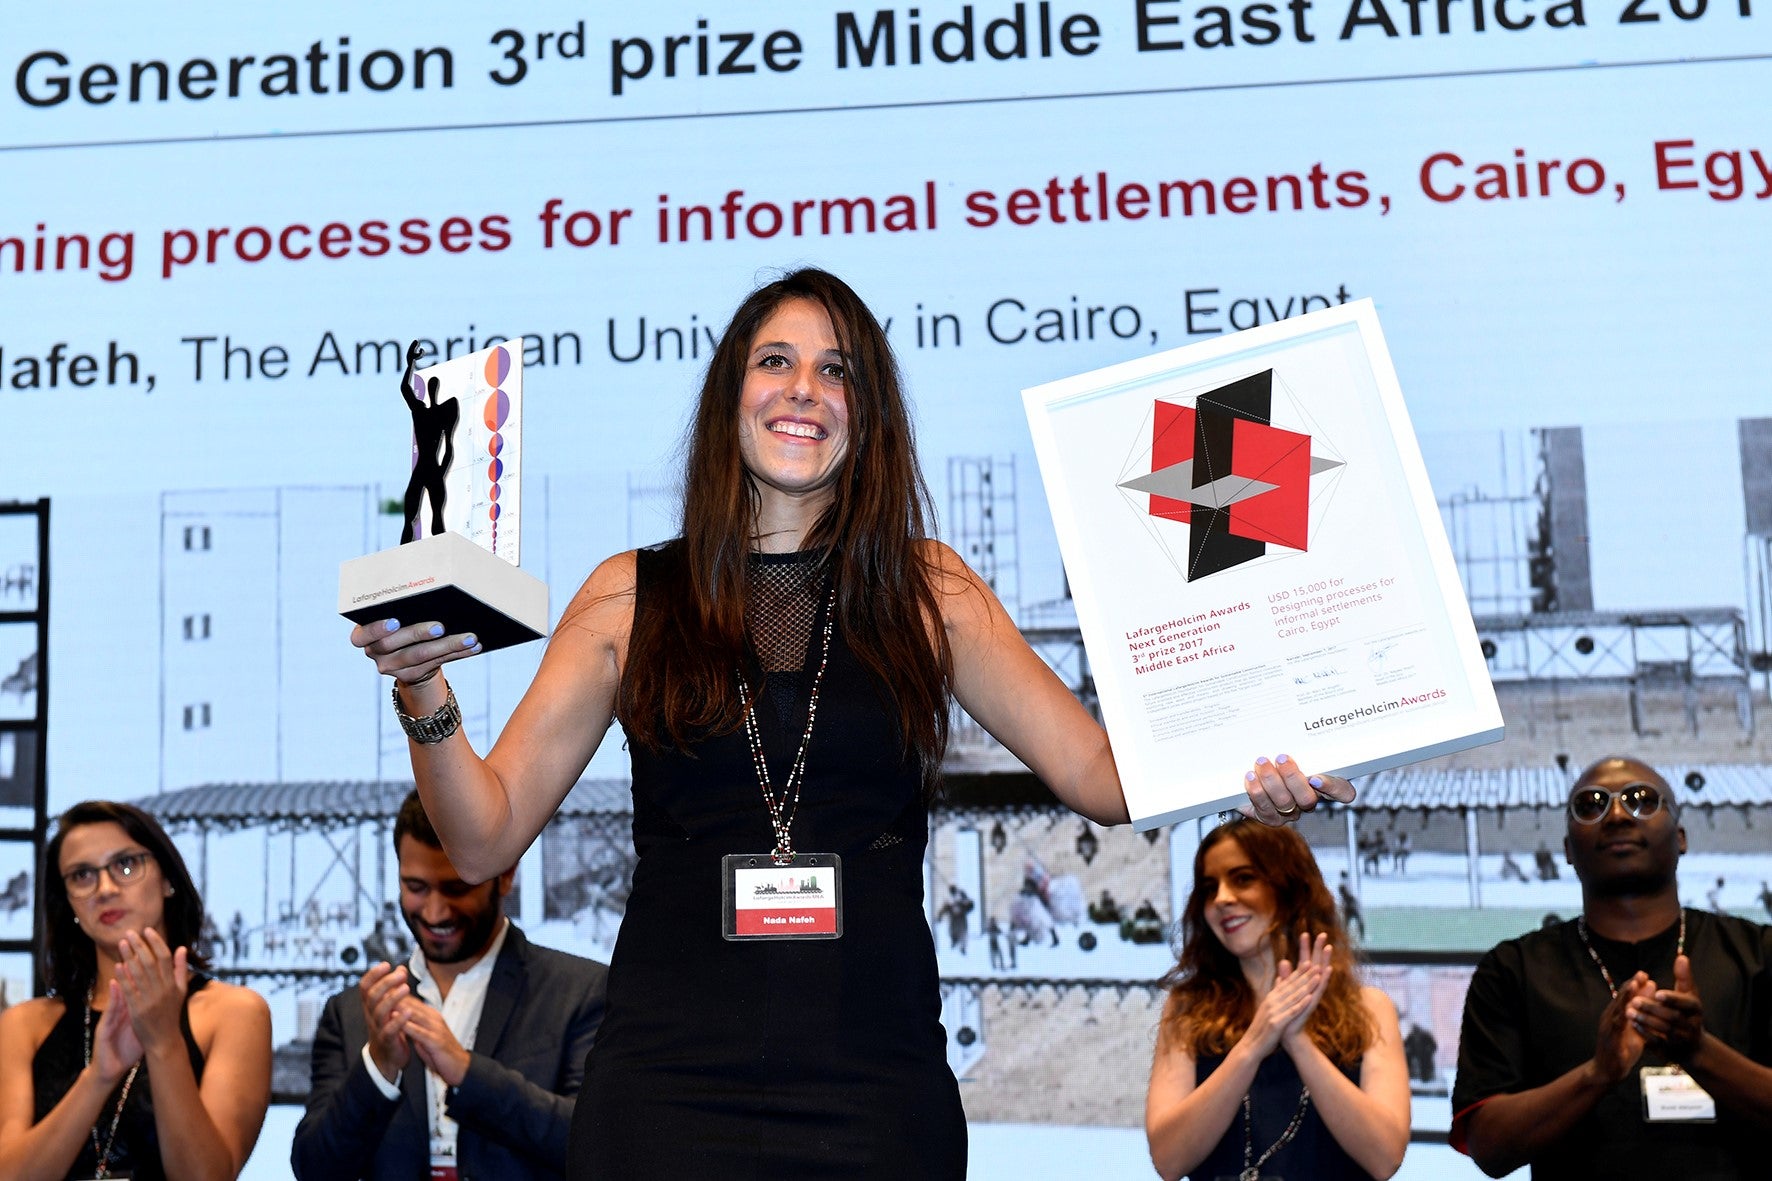 image of Nada Nafeh with her award